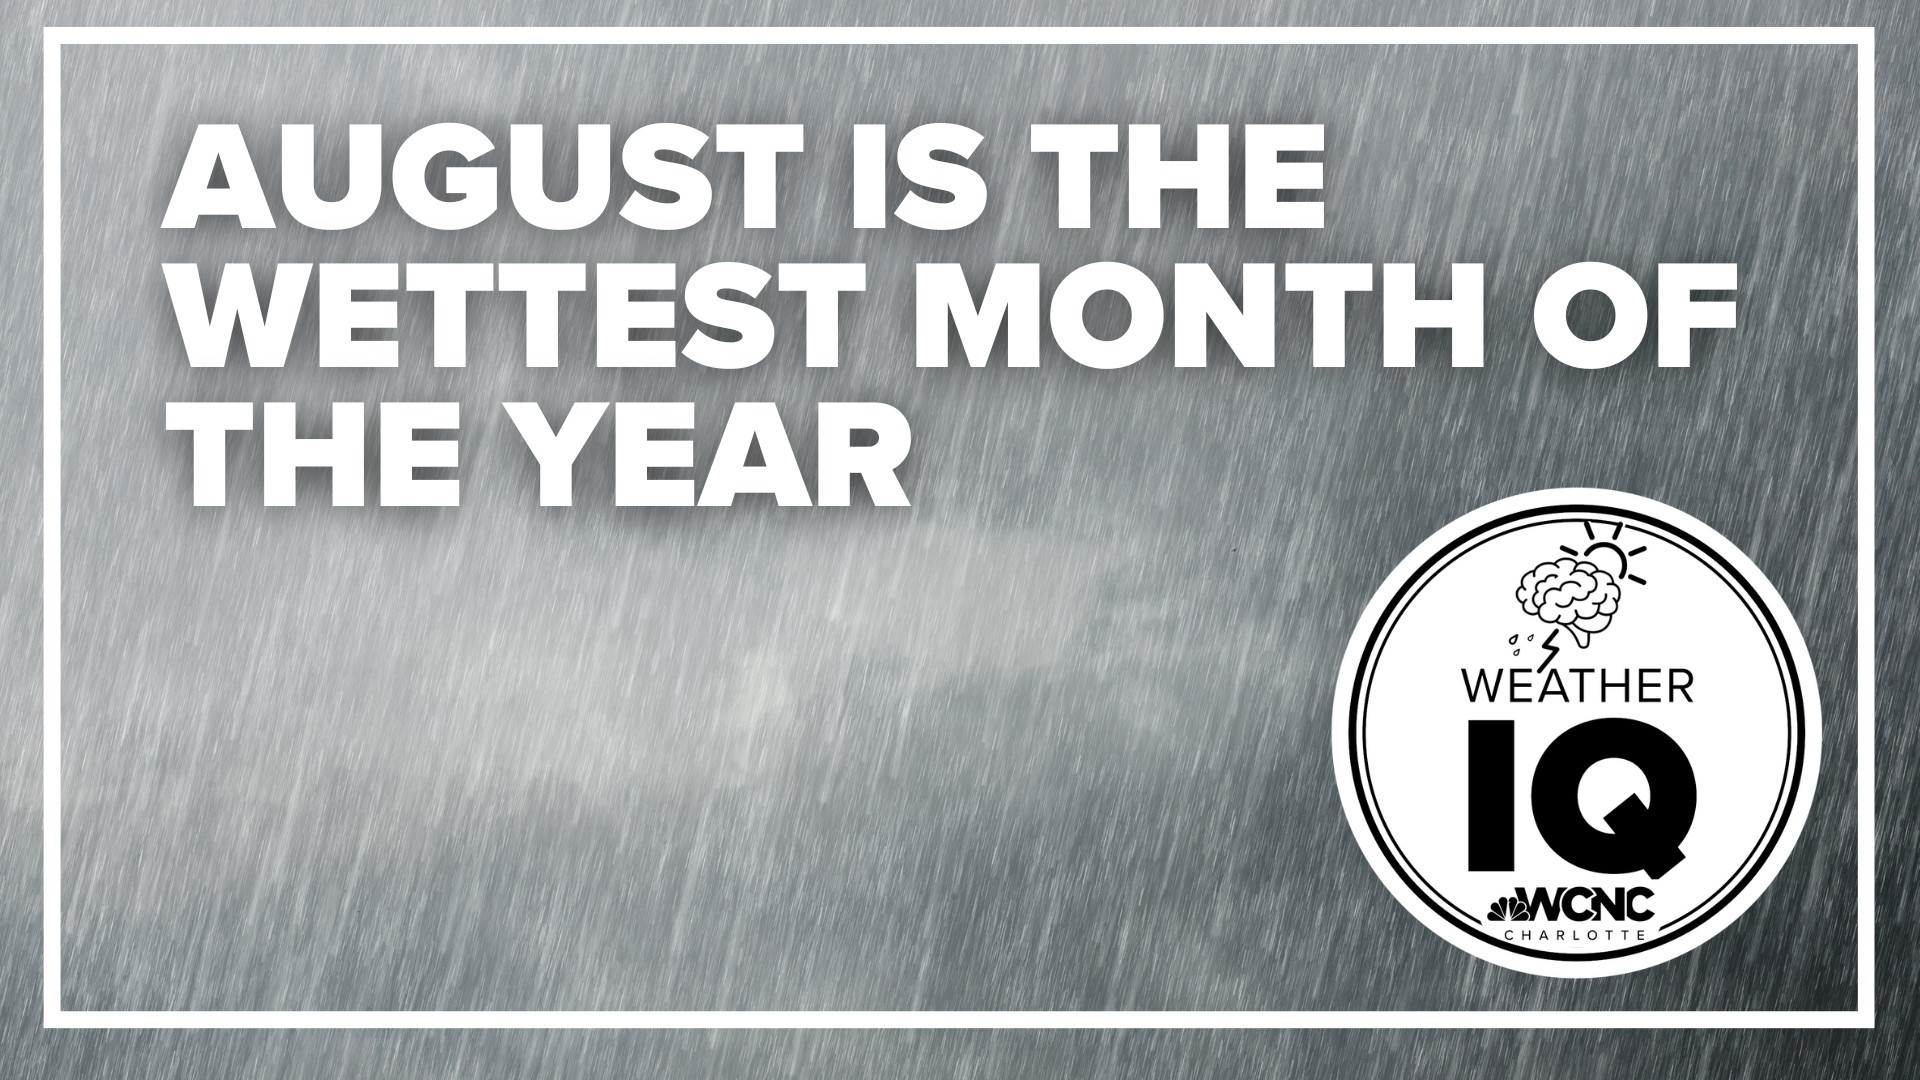 There was no shortage of rainfall in July, and August could be even wetter